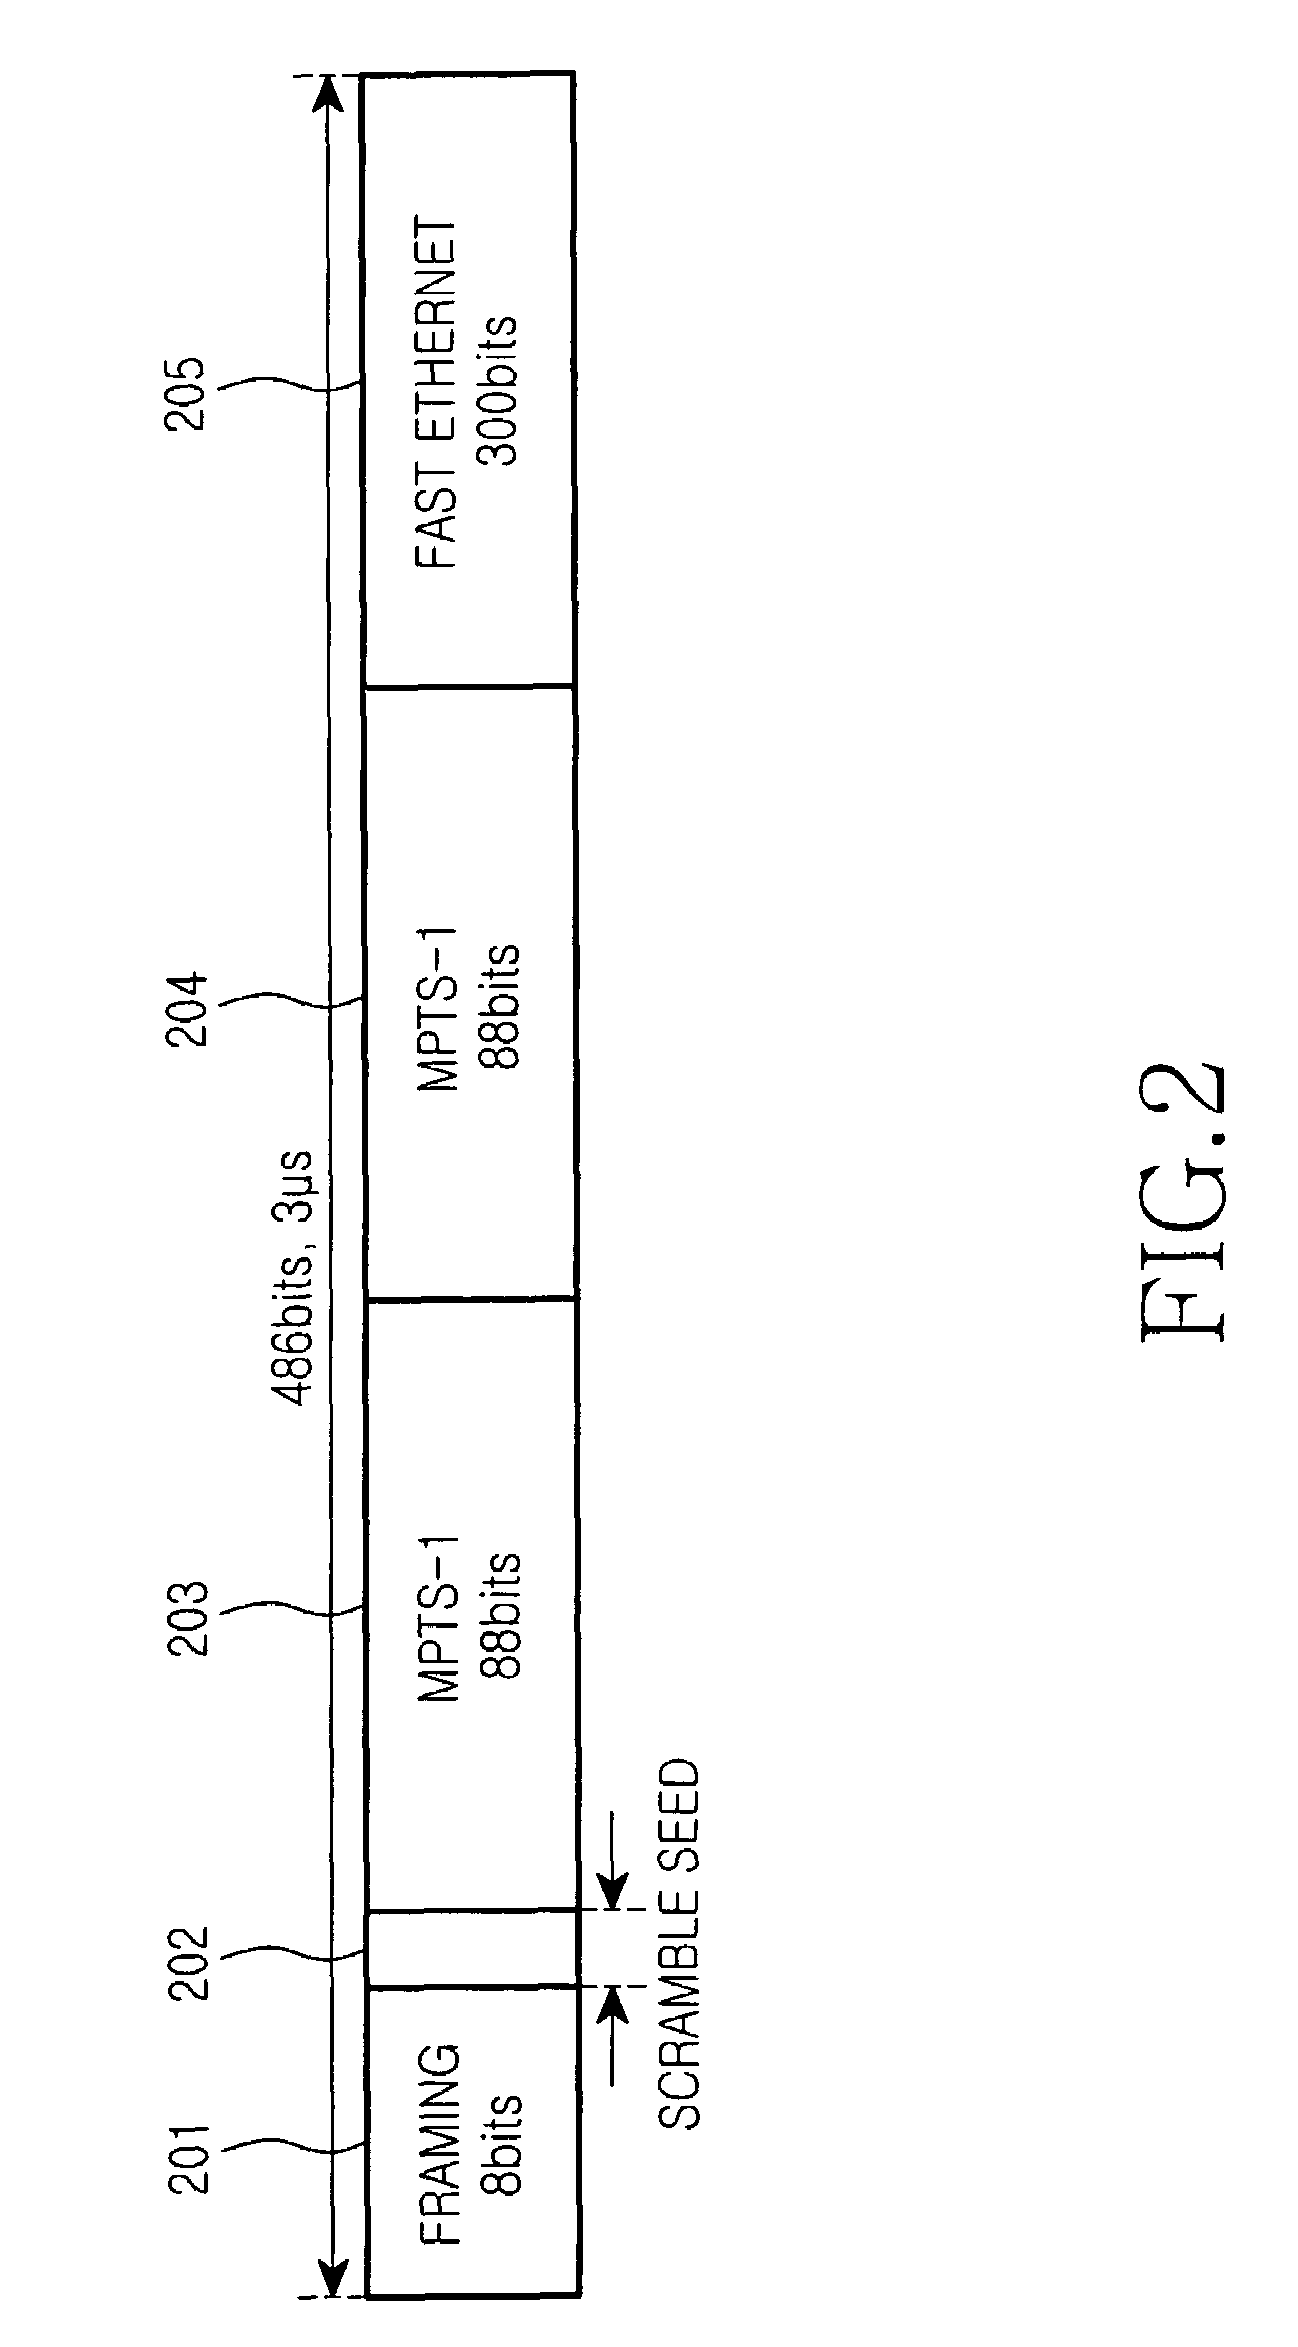 Time division multiplexing frame for multiplexing different synchronous signals and method for transmitting and receiving the same